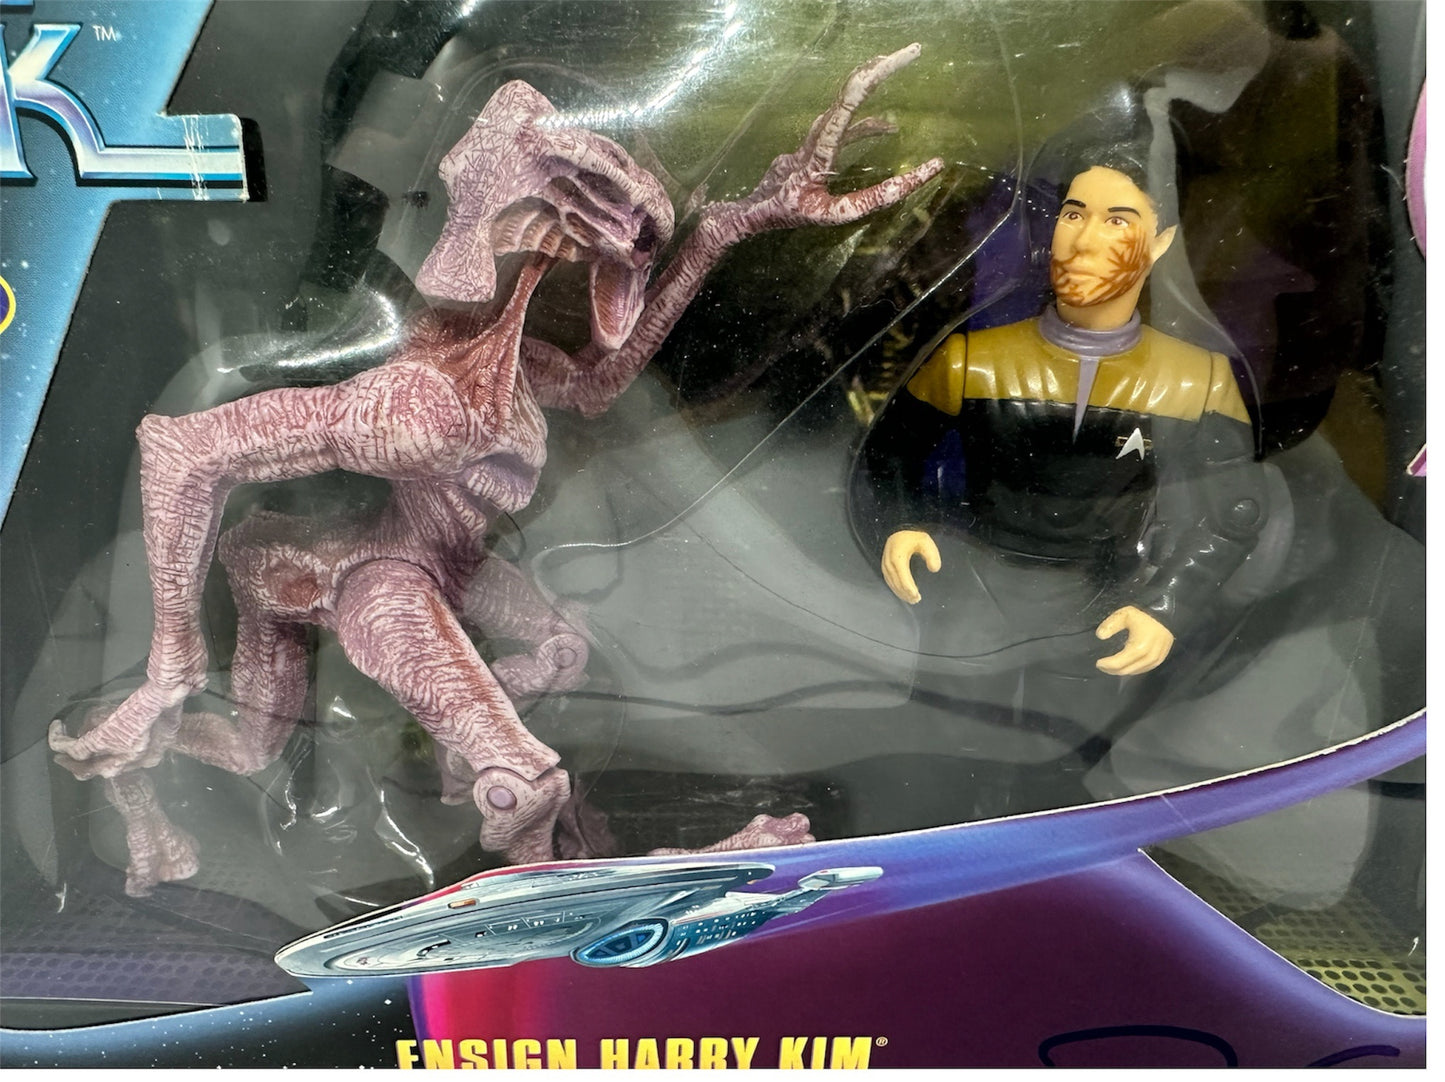 Vintage Playmates 1998 Star Trek Voyager Alien Series Edition Ensign Harry Kim And Species 8472 Action Figures from Star Trek Voyager Episode Scorpian - Autographed By Garret Wang